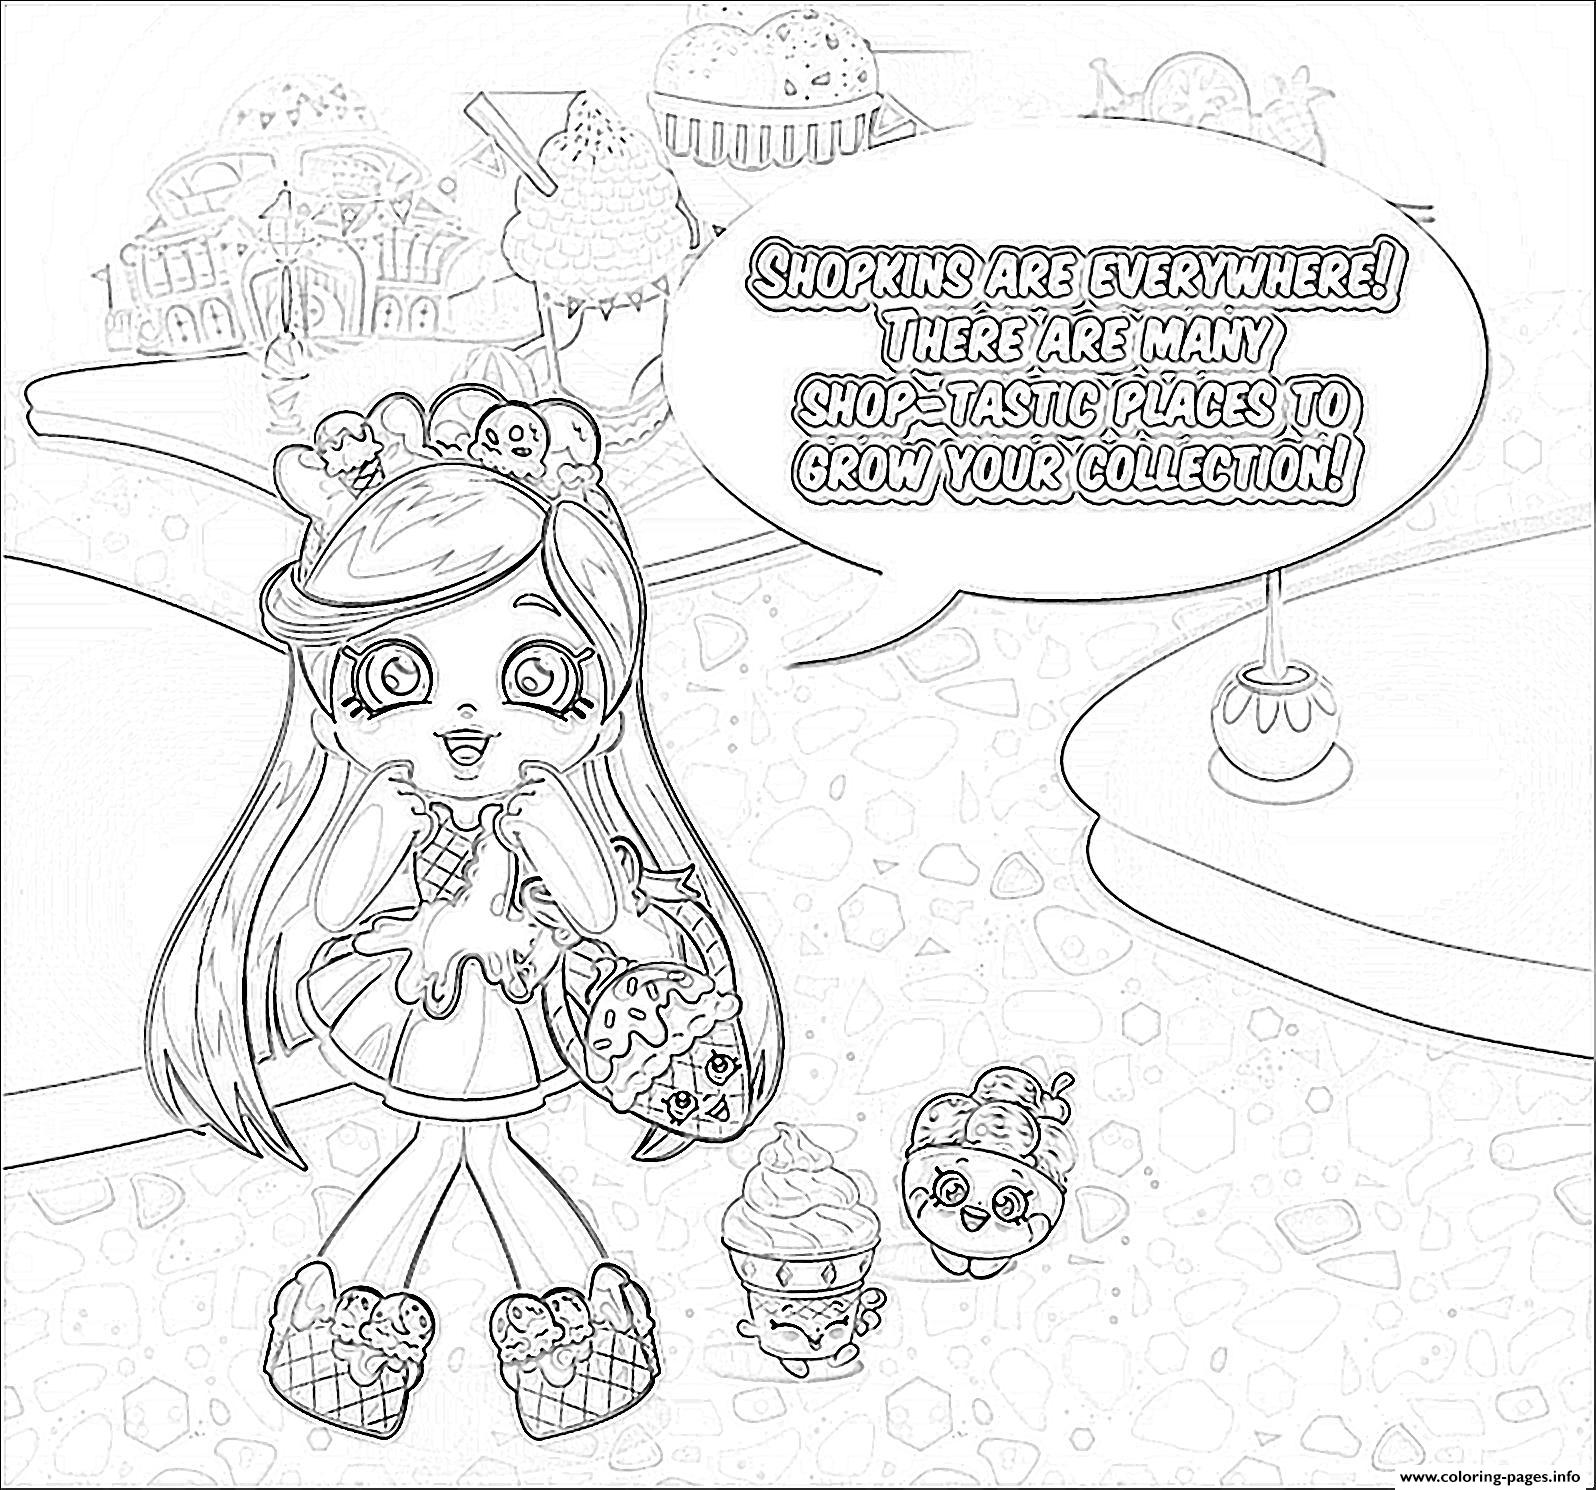 Shopkins Everywhere Sketch coloring